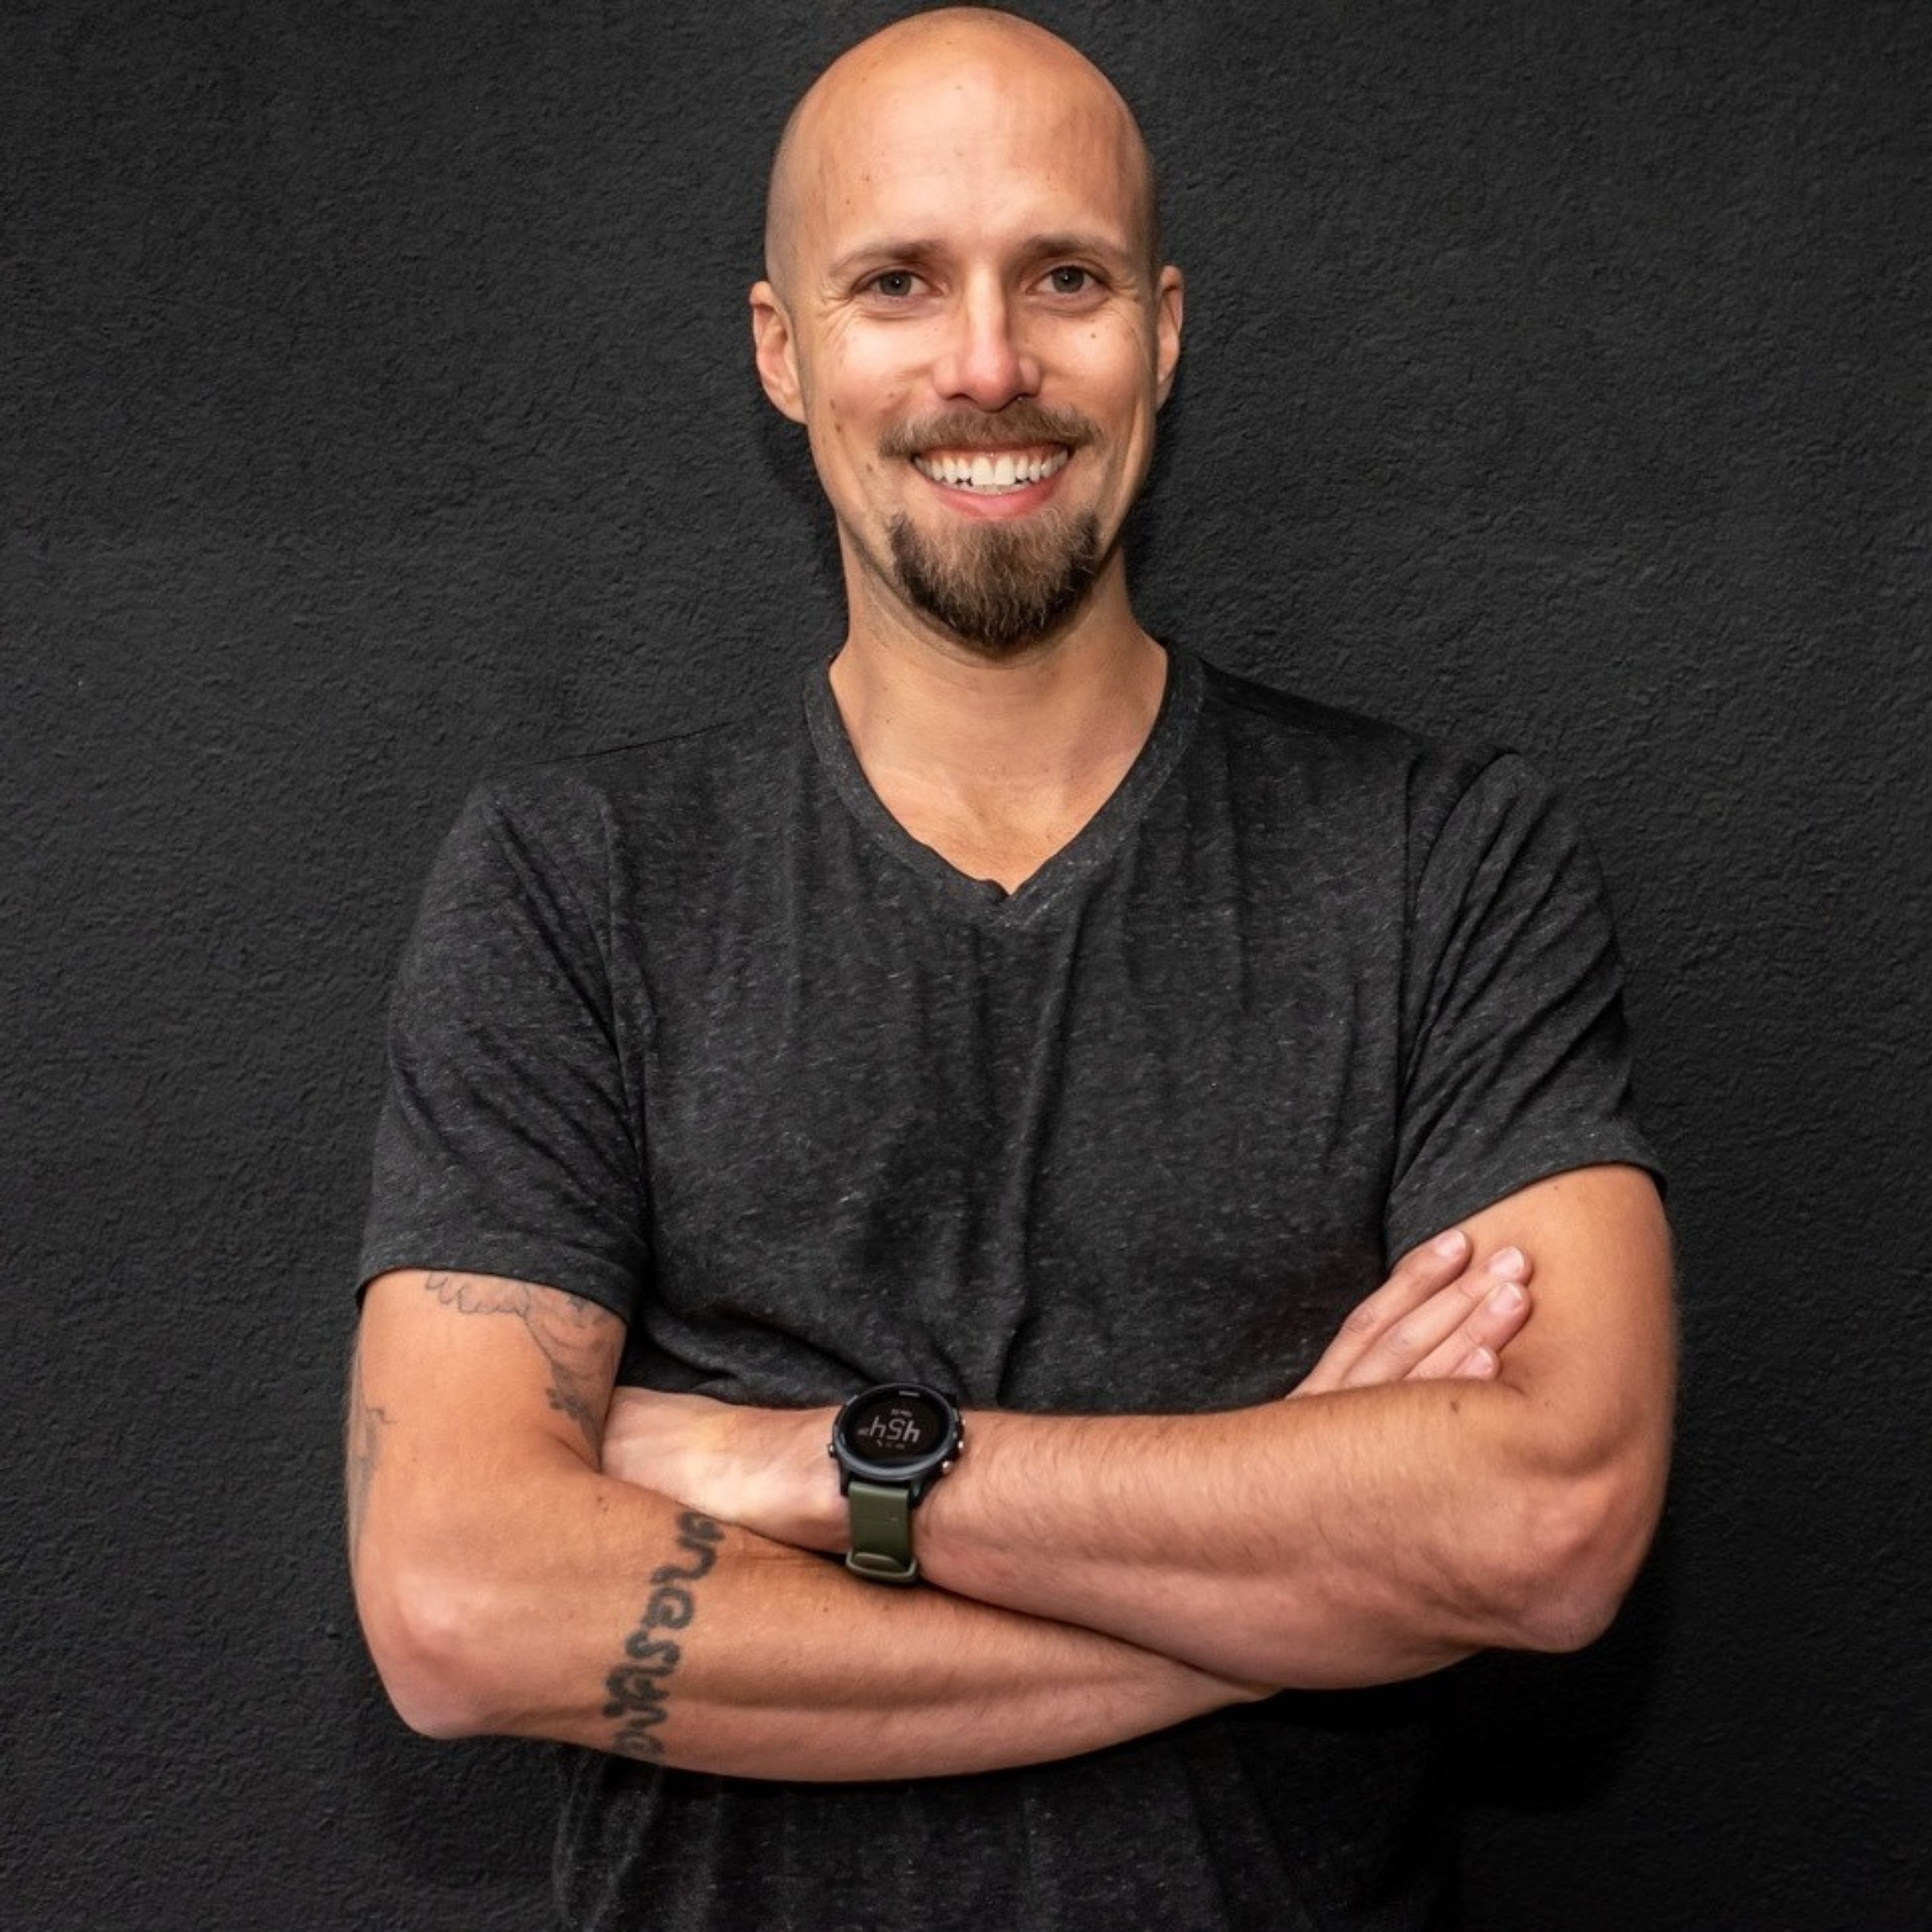 EP530: Brook Bishop - How To Create Business Mastery